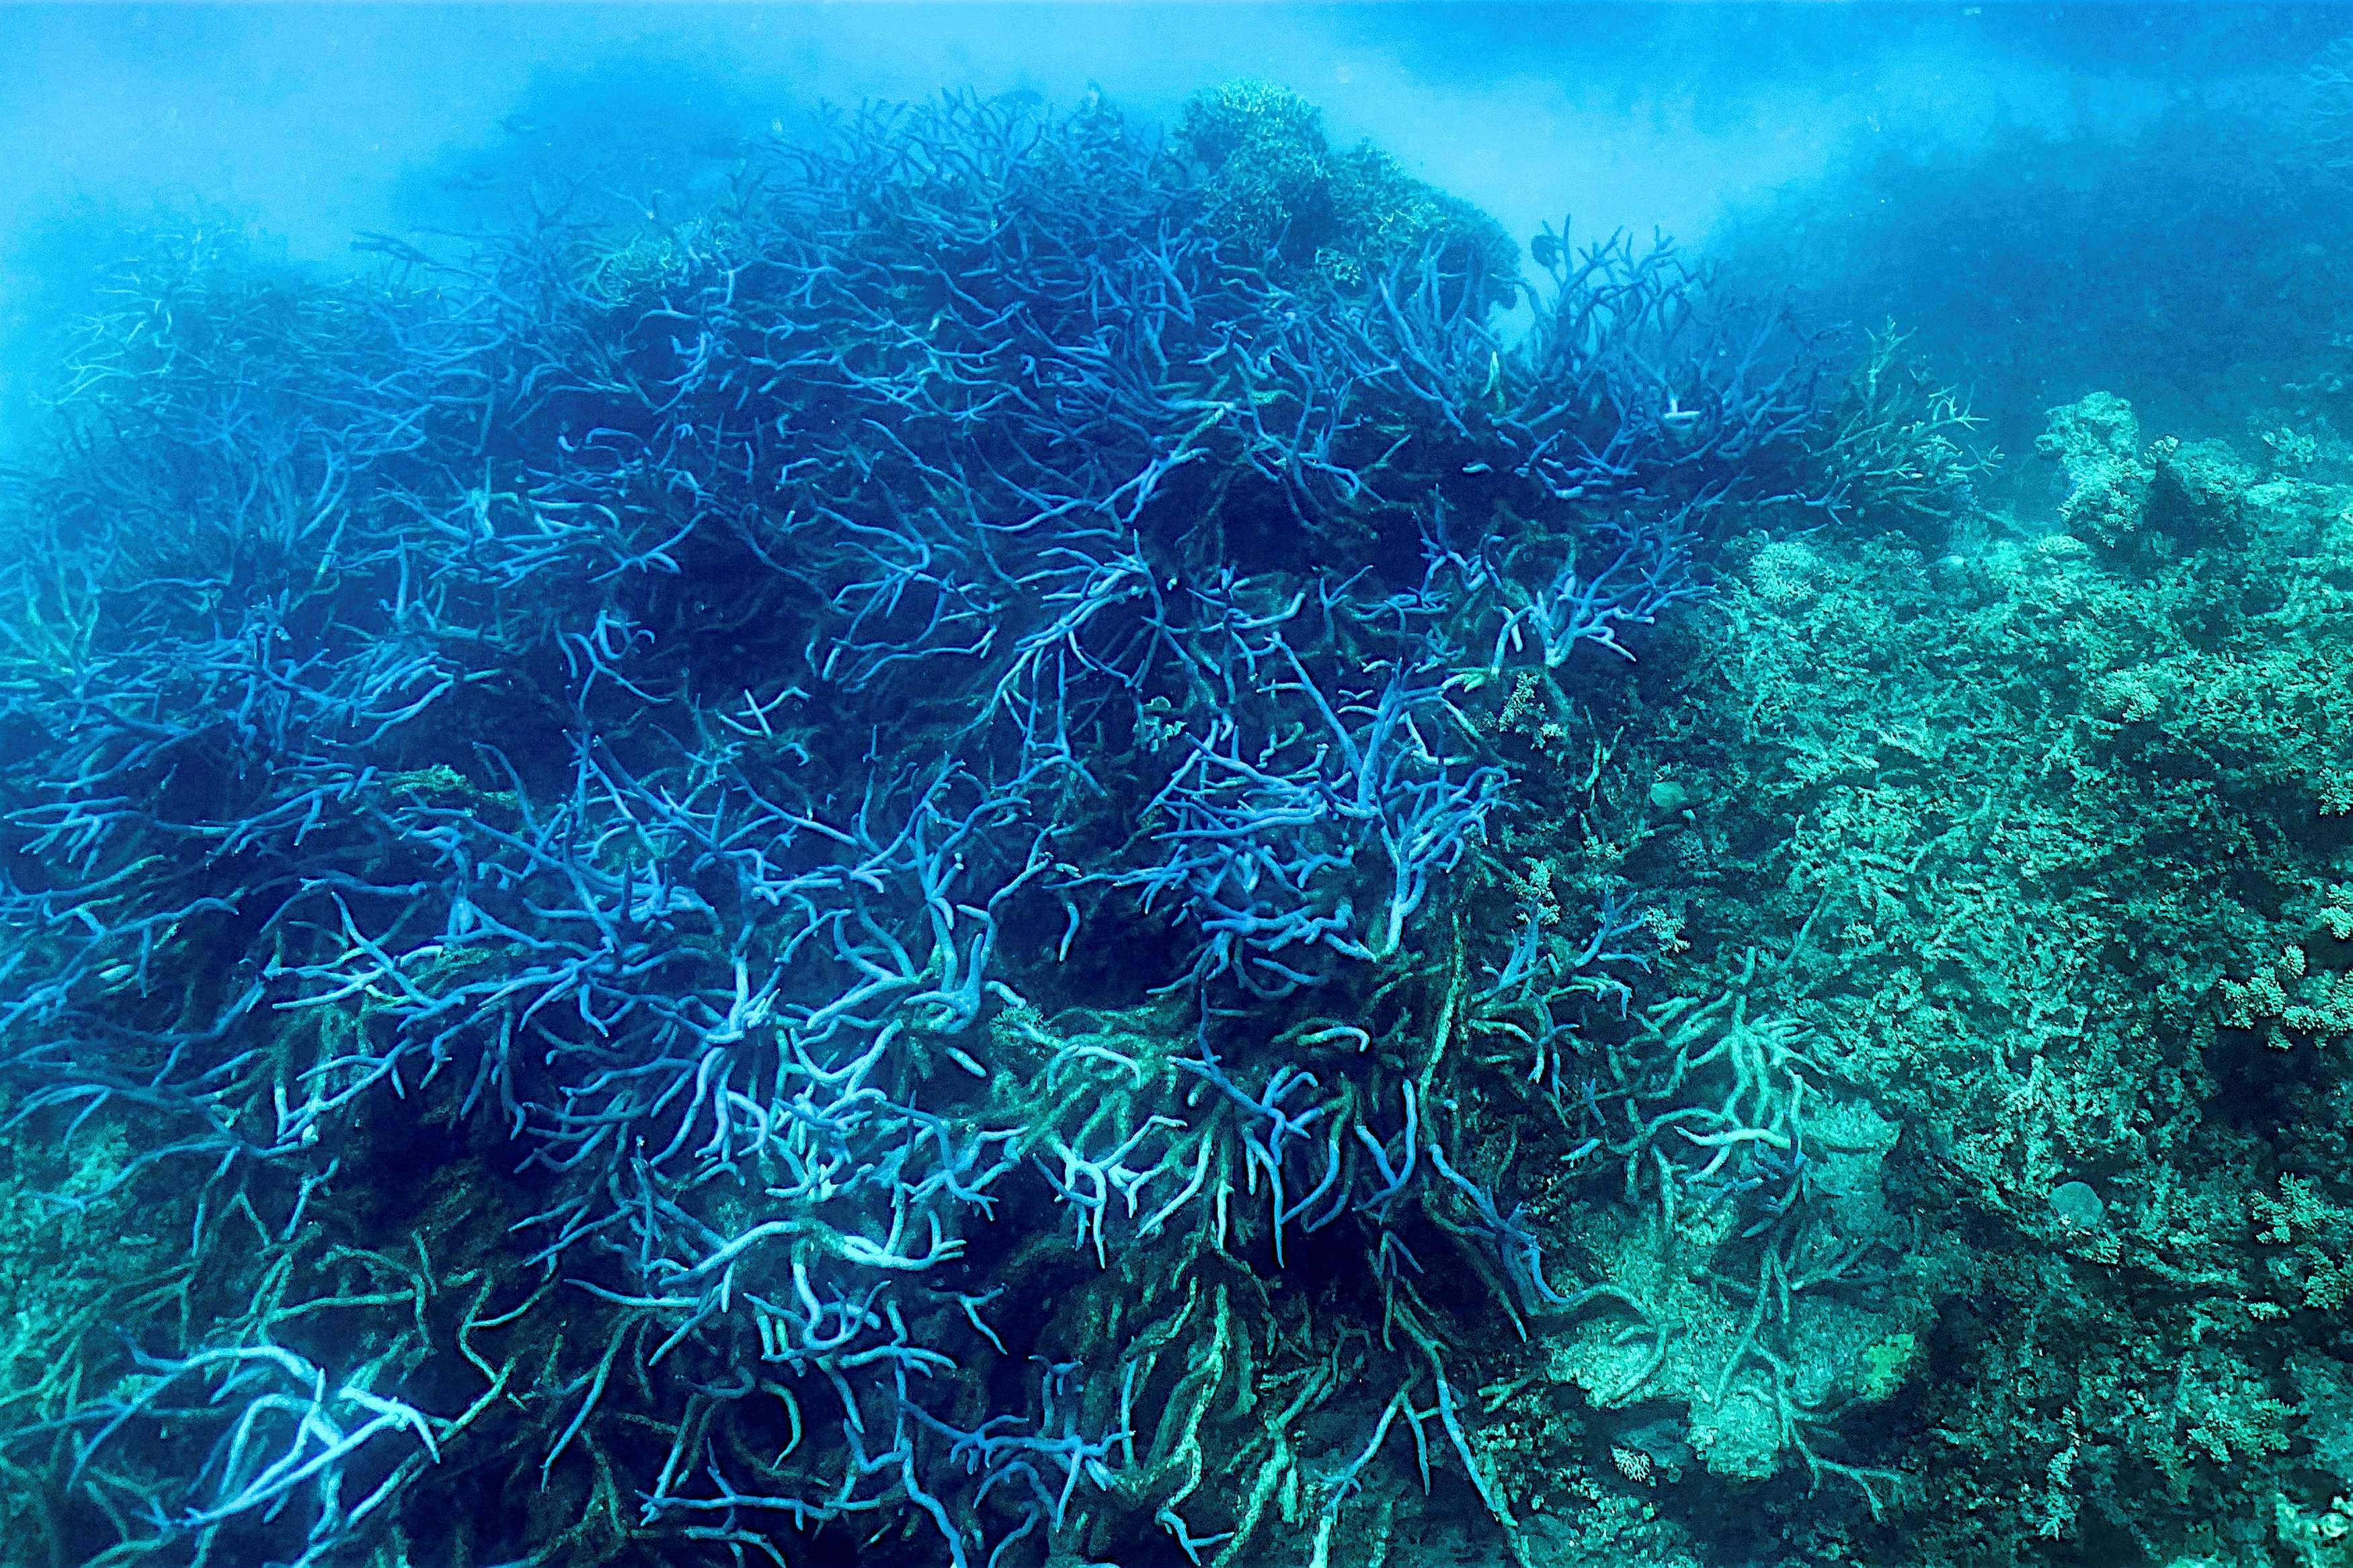 This file picture taken on 7 March 2022 shows the current condition of the coral on the Great Barrier Reef. The world’蝉 largest natural reef system is suffering a ‘mass bleaching event’ as coral comes under heat stress from warmer seas, reef authorities said on 25 March